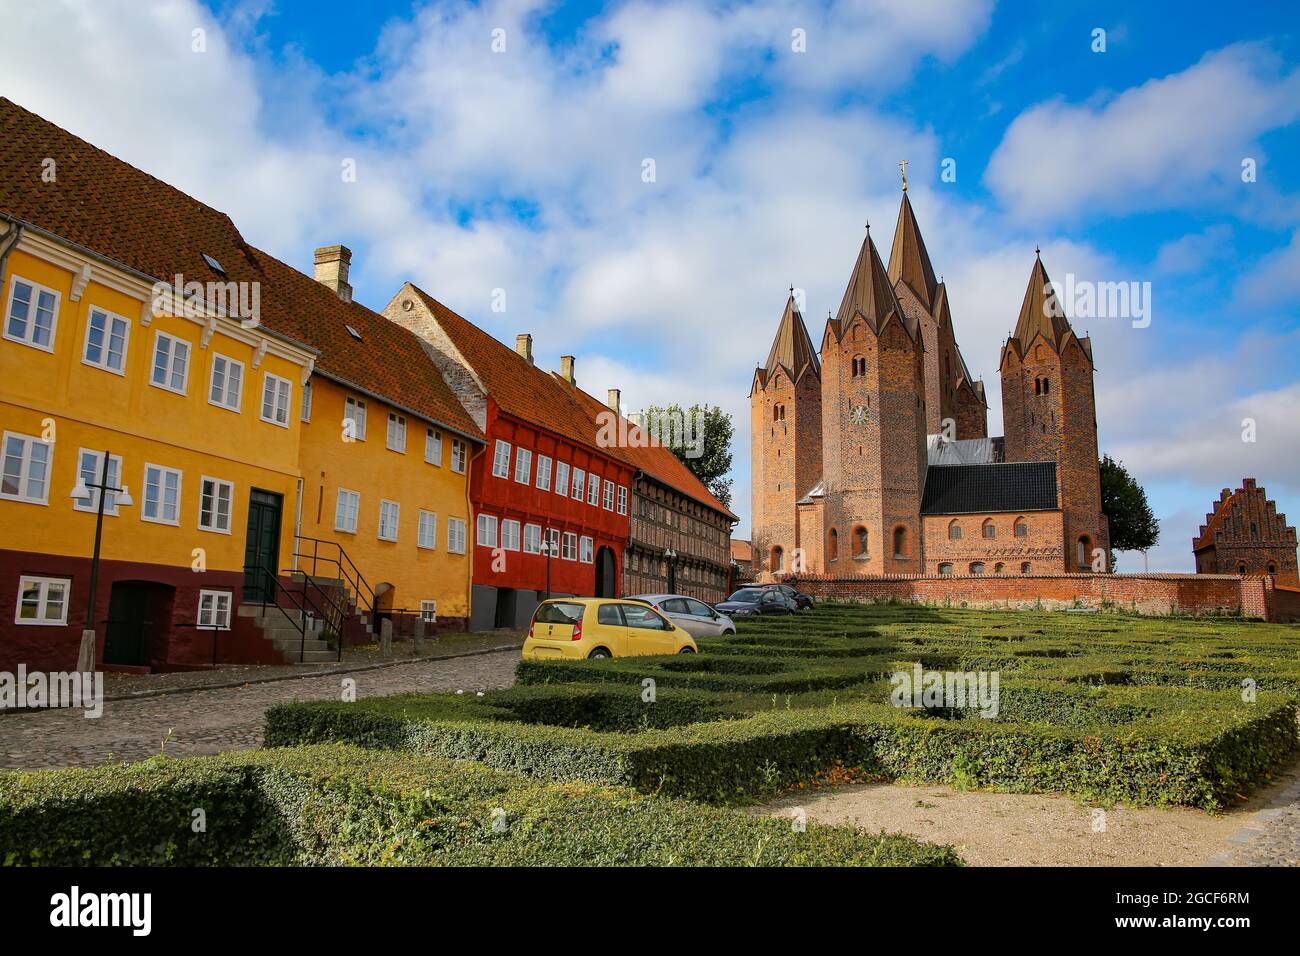 Beautiful street view of the town. Colourful traditonal houses along the road with the Church of Our Lady in the background. Kalundborg, Denmark. Stock Photo